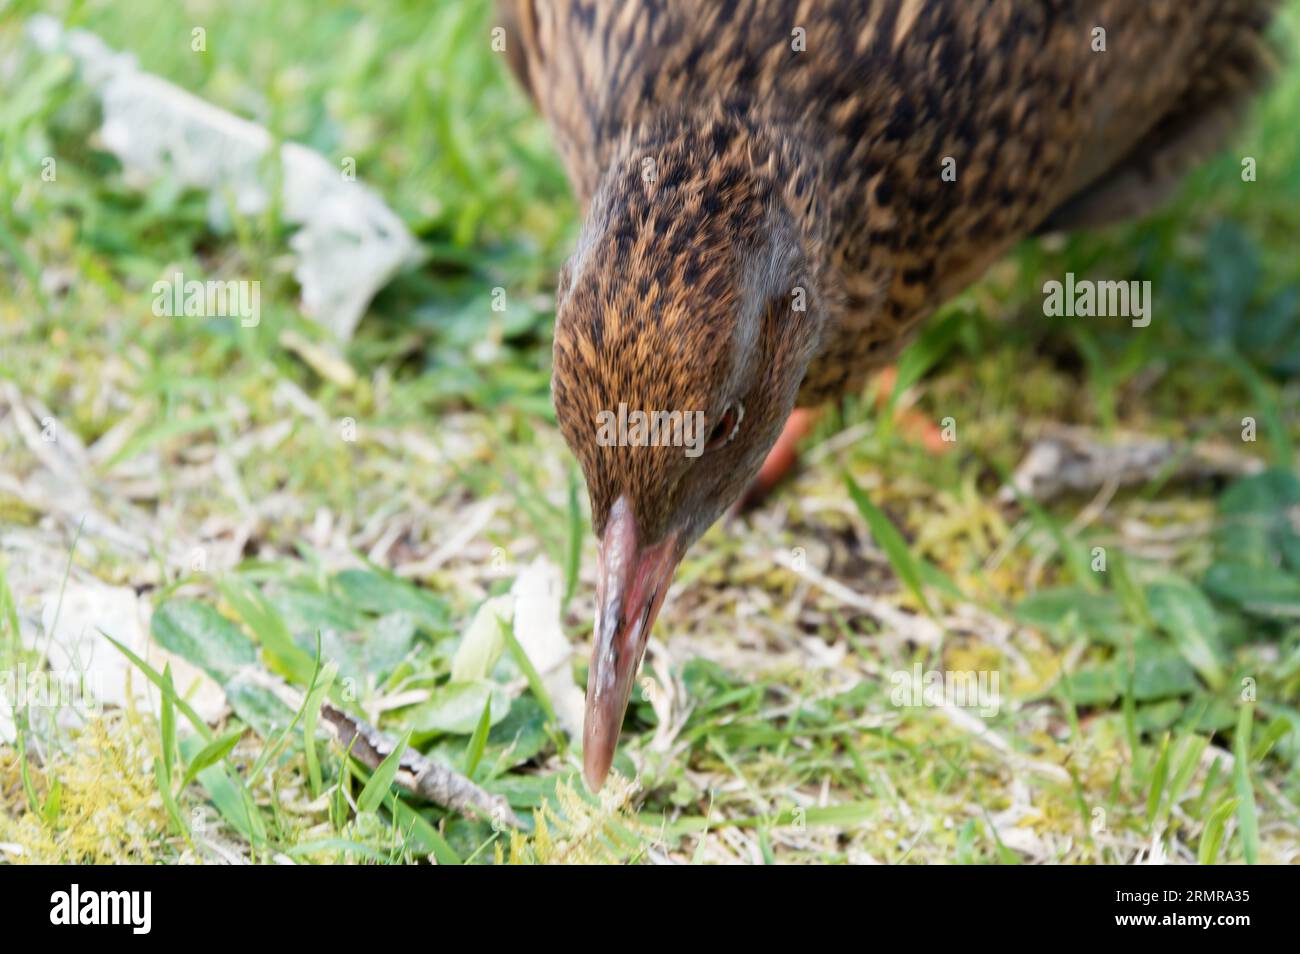 A weka is about to peak something off the ground. Stock Photo